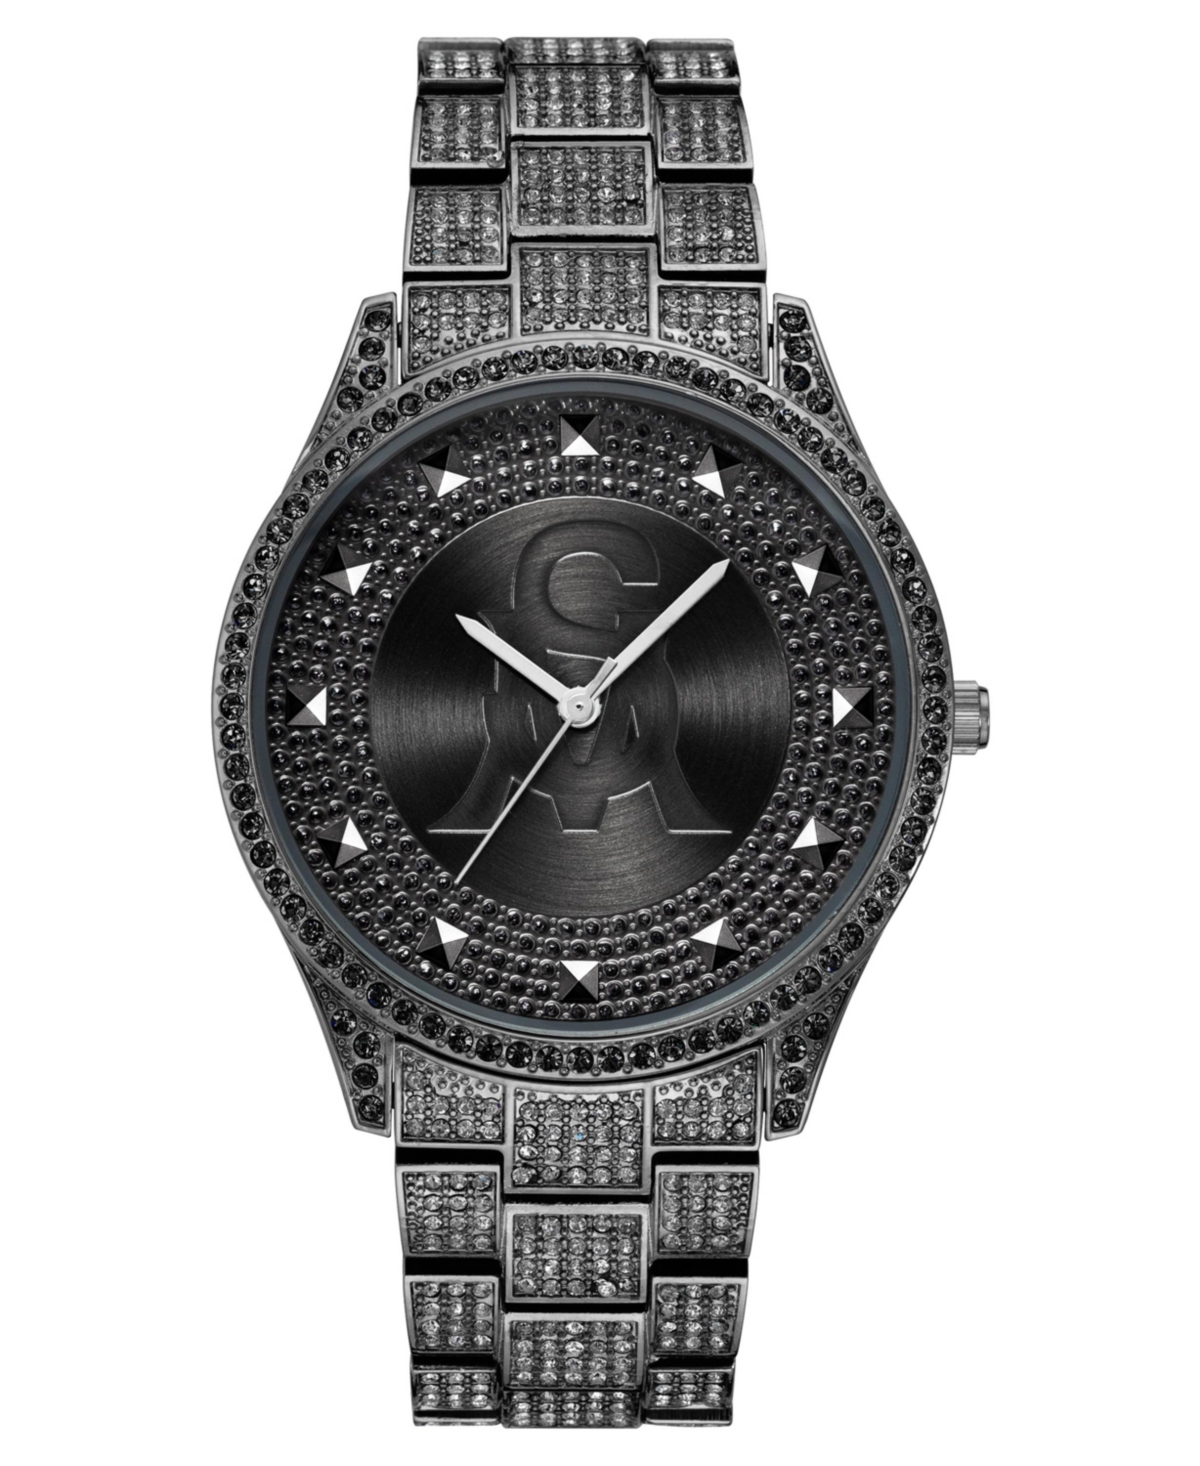 Steve Madden Women's Black-tone Metal Bracelet And Accented With Black Crystals Watch, 40mm